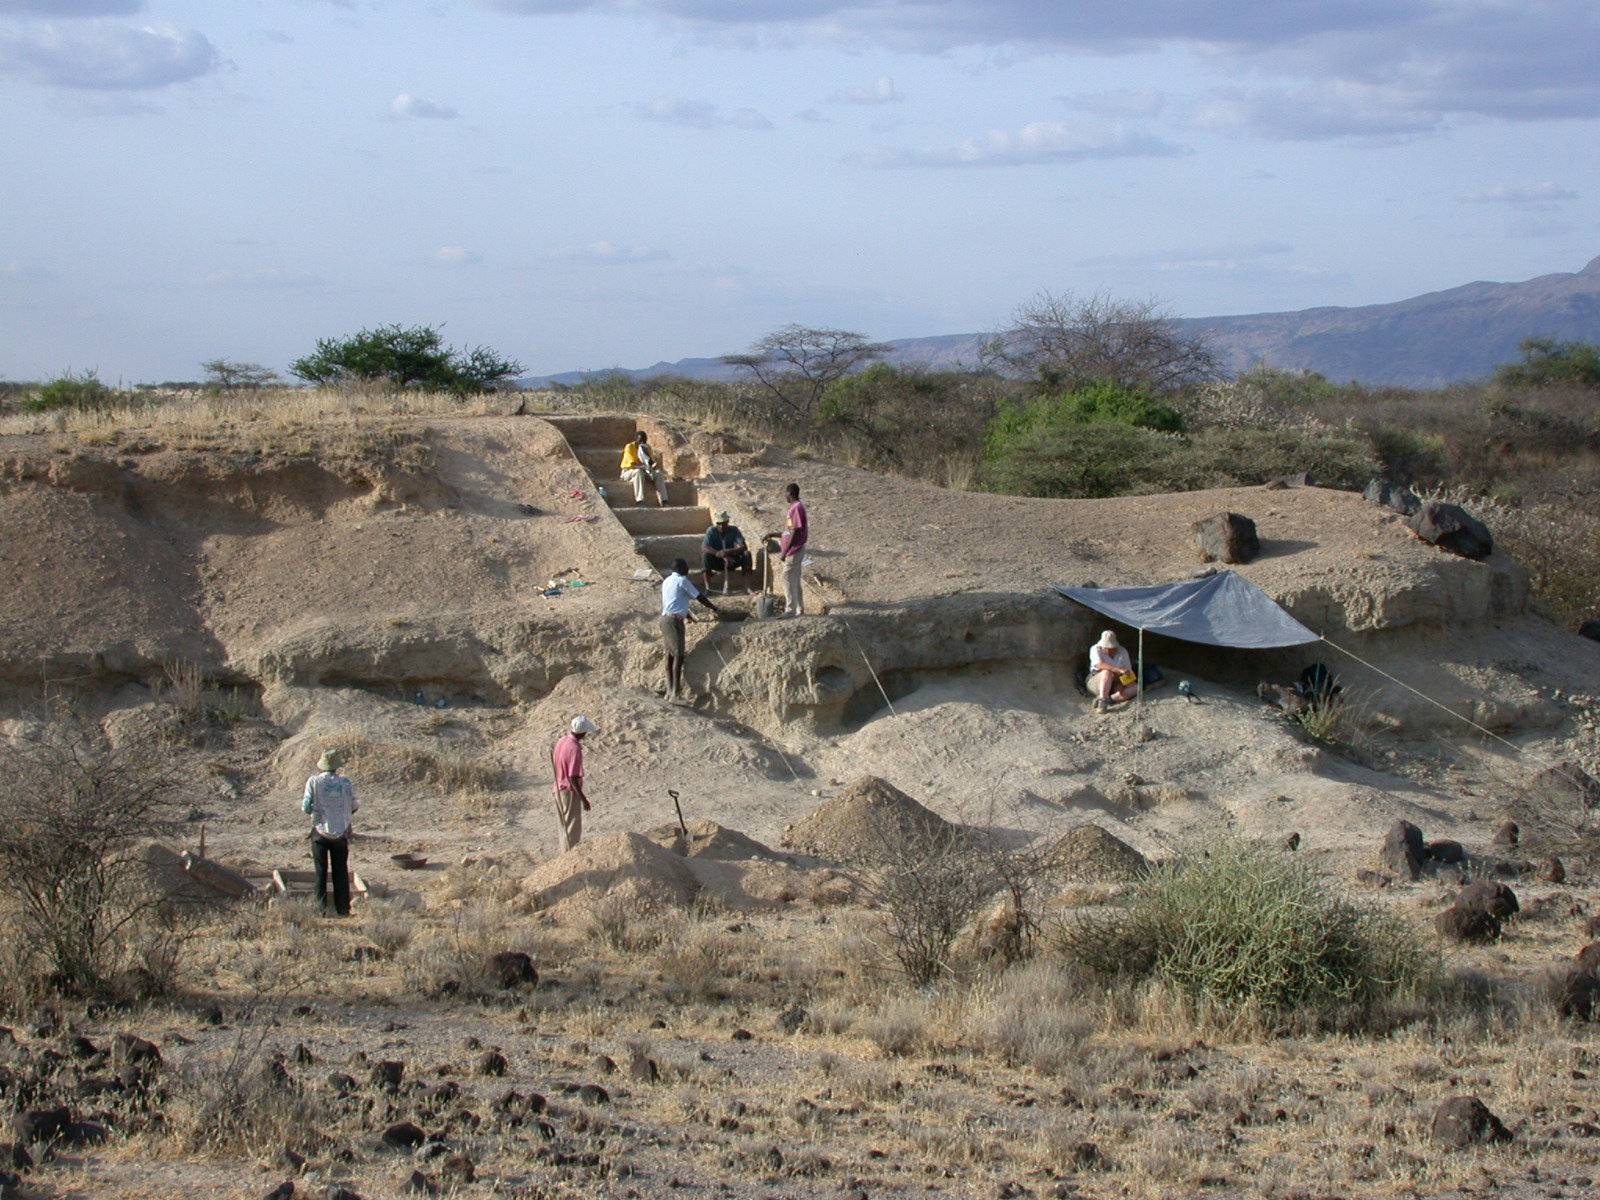 Smithsonian researchers are at the Olorgesailie Basin excavation site in southern Kenya